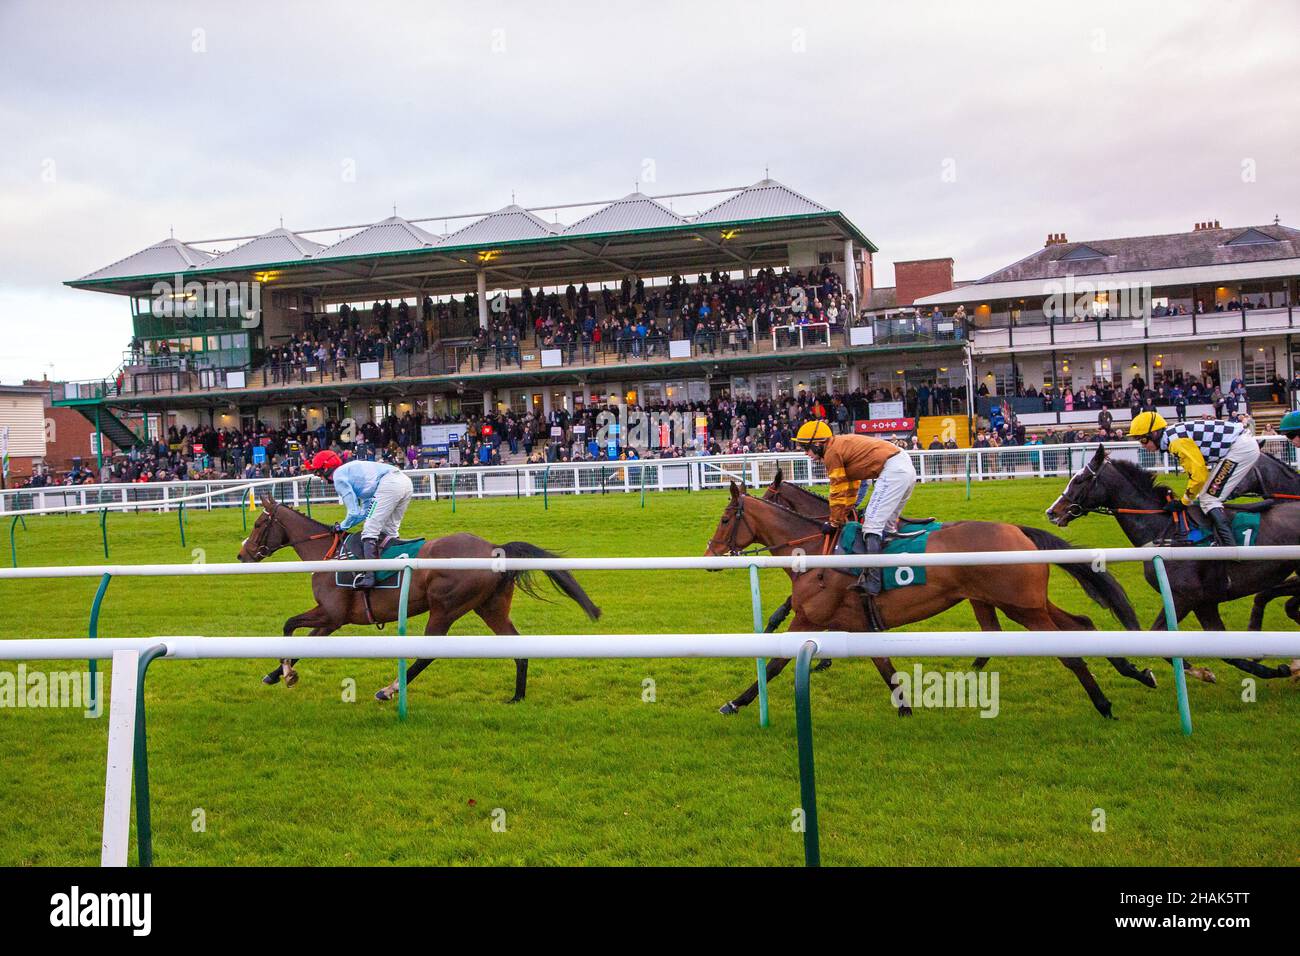 National hunt horse racing at Warwick racecourse England with action in front of the main stand taken from the  caravan and motor home club site 2021 Stock Photo